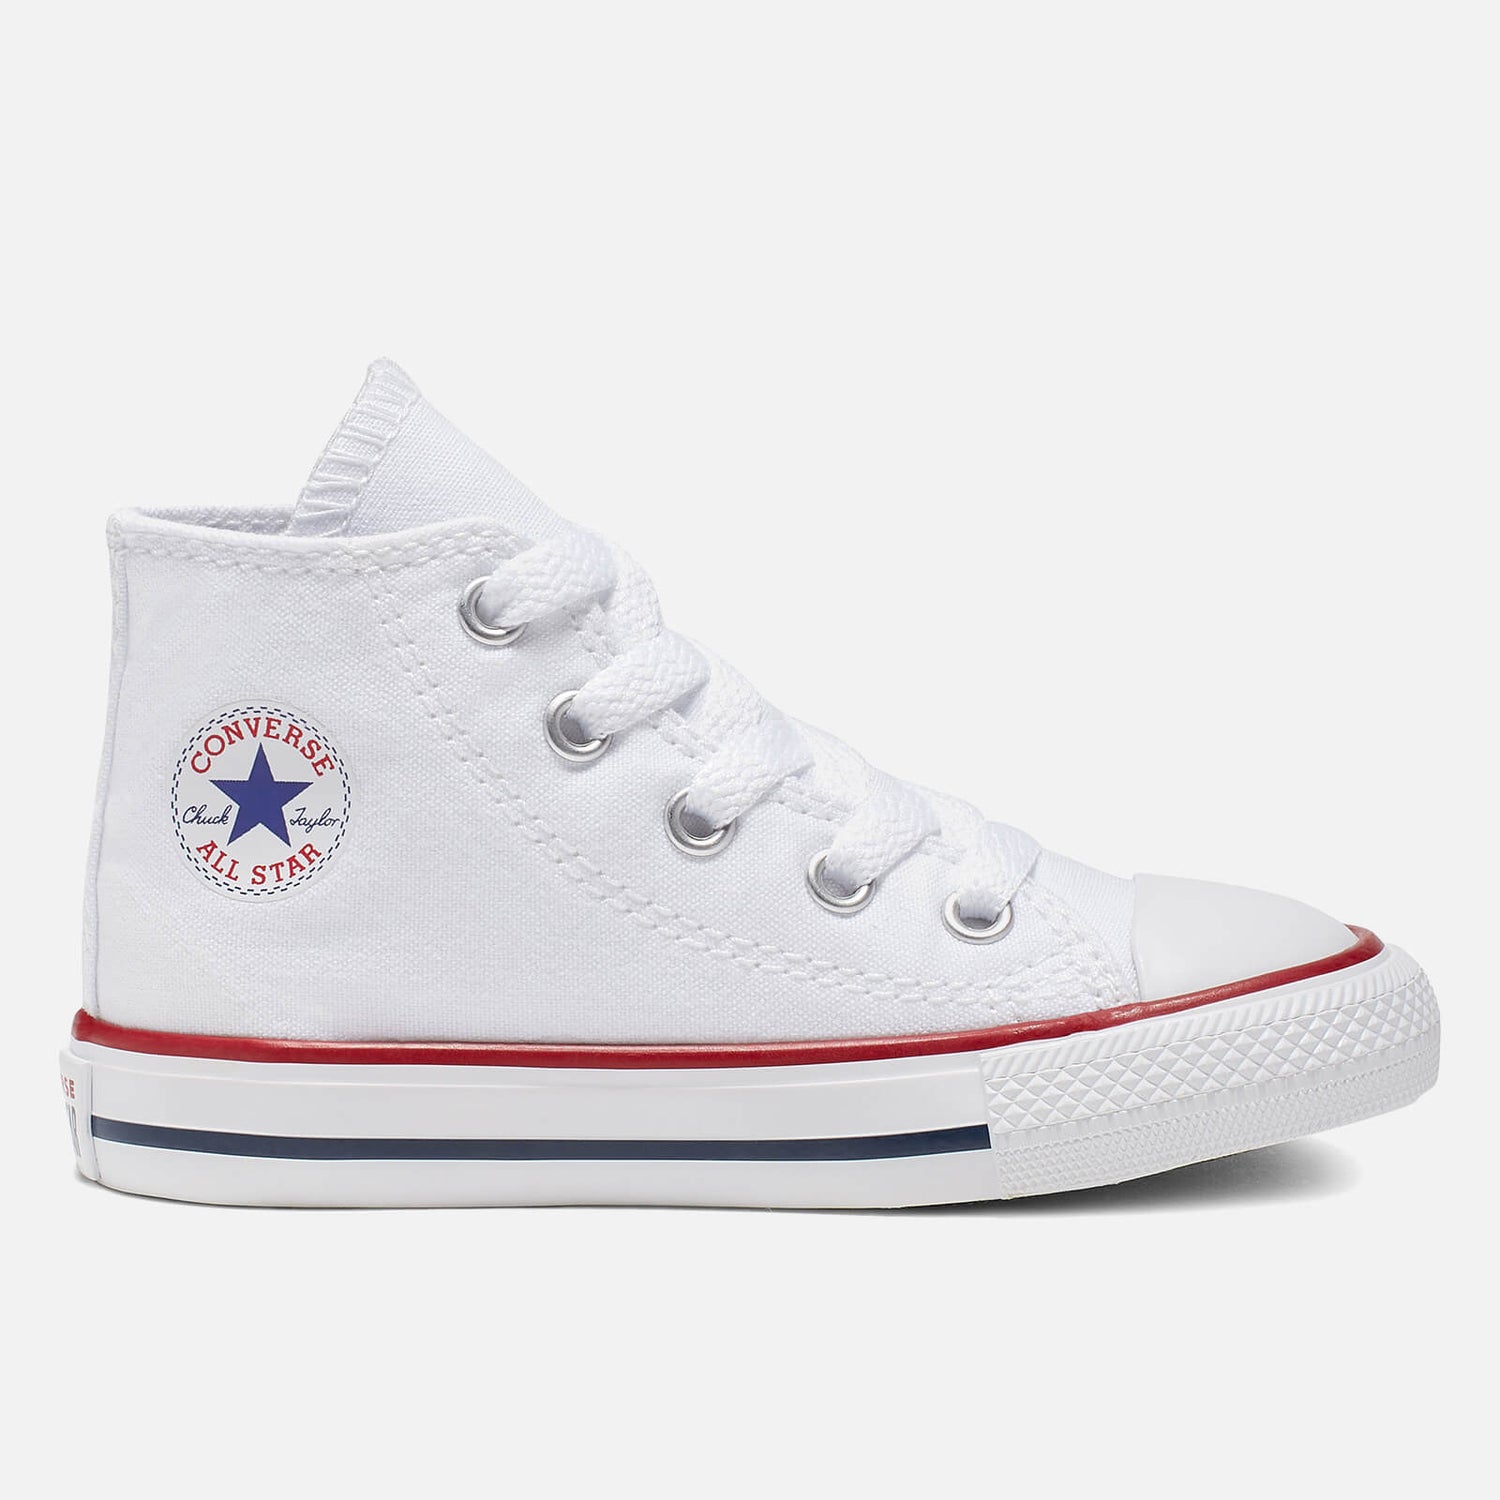 Converse Toddlers' Chuck Taylor All Star Hi - Top Tainers - Optical White - UK 4 Baby